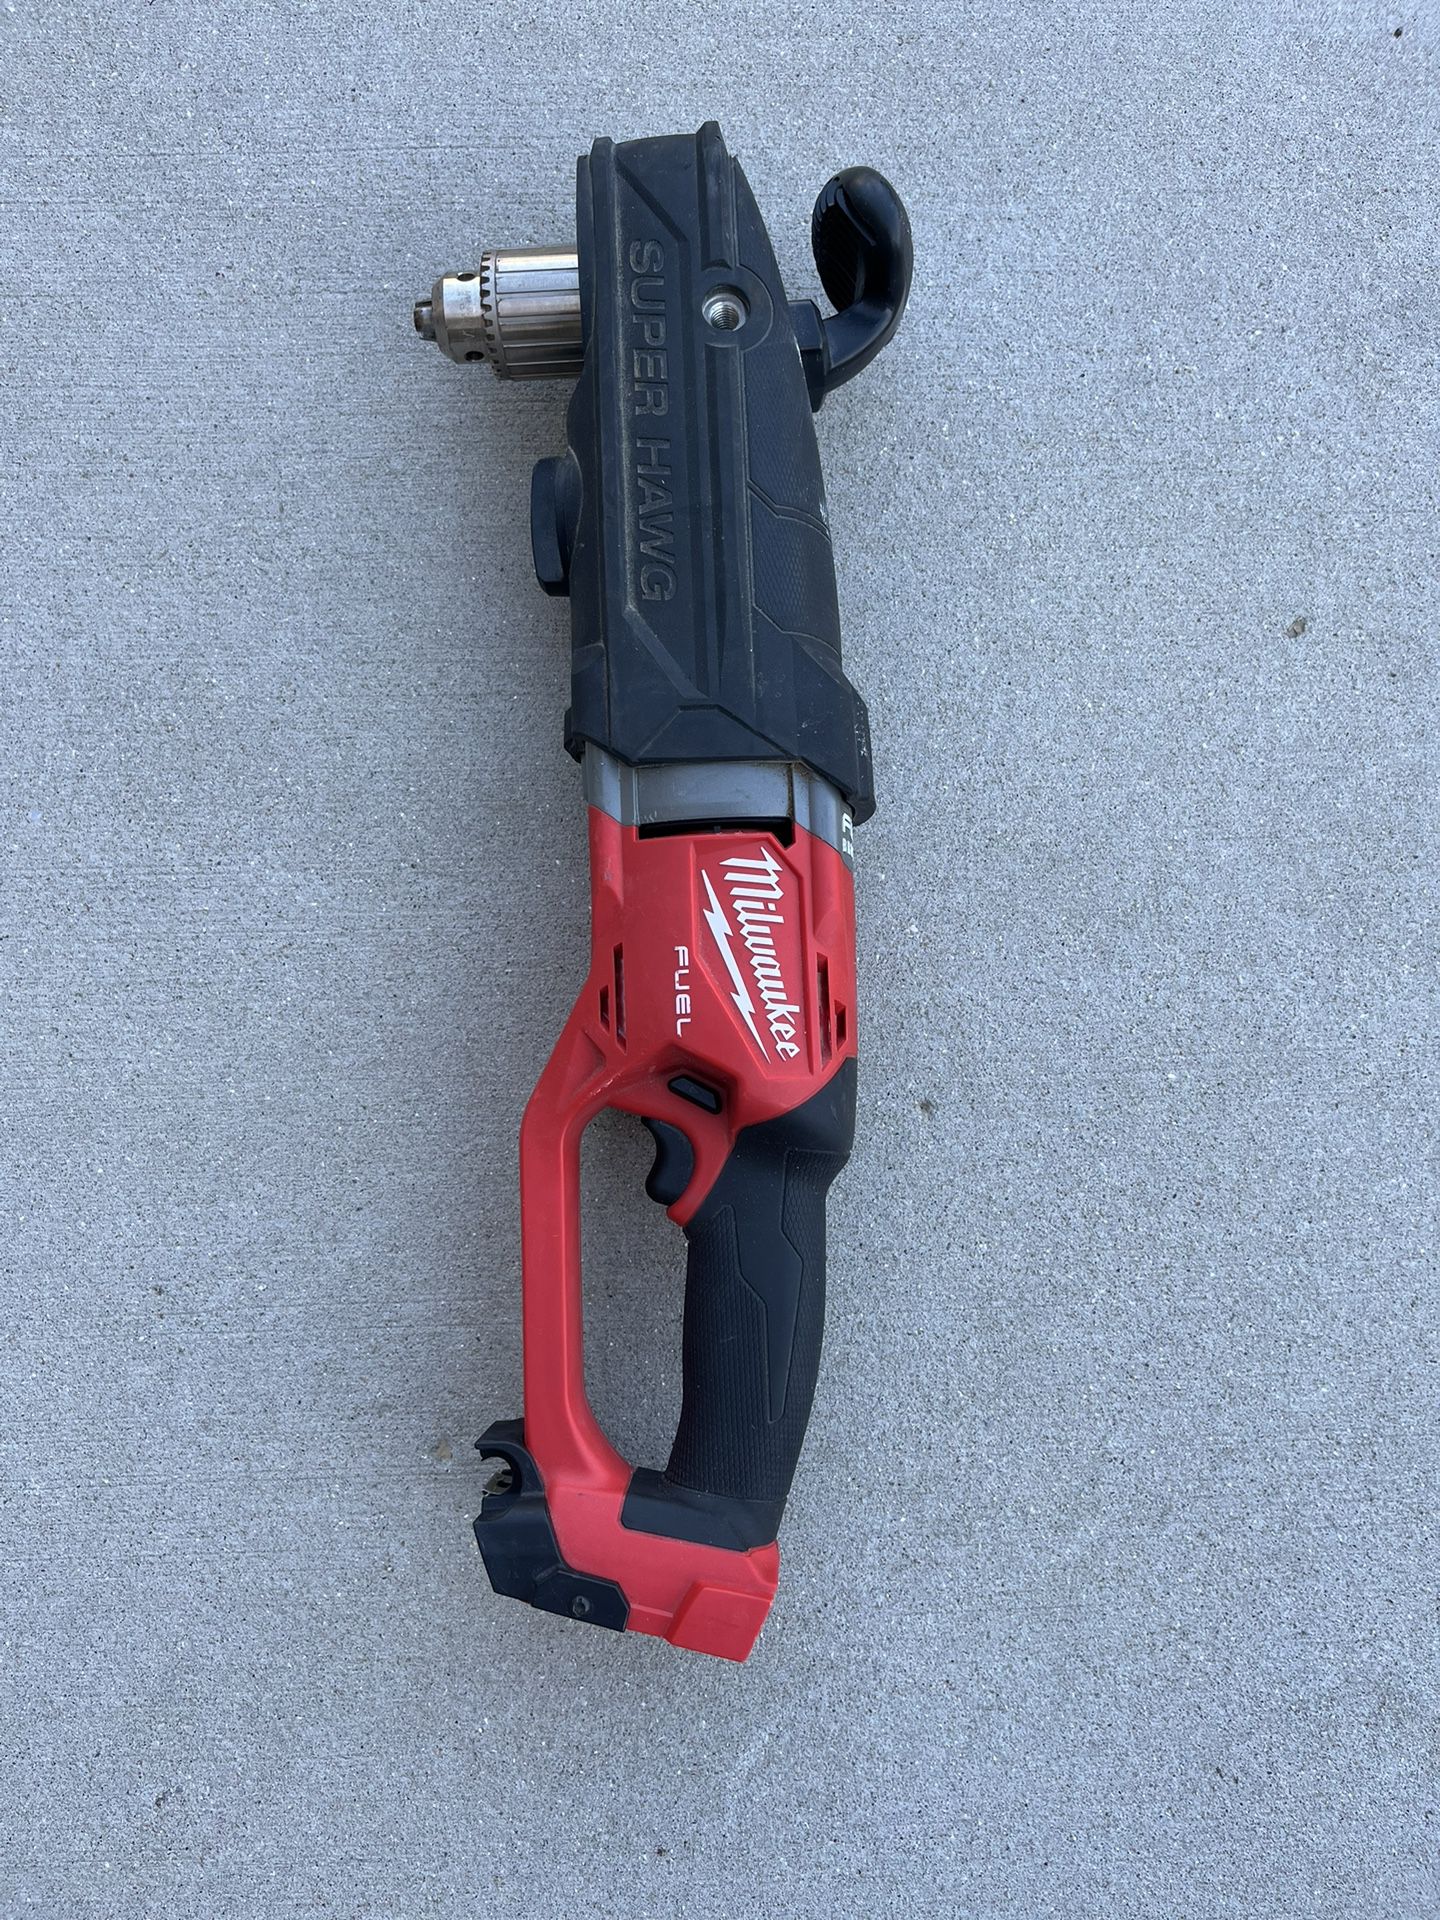 Milwaukee Superhawg Right Angle Drill